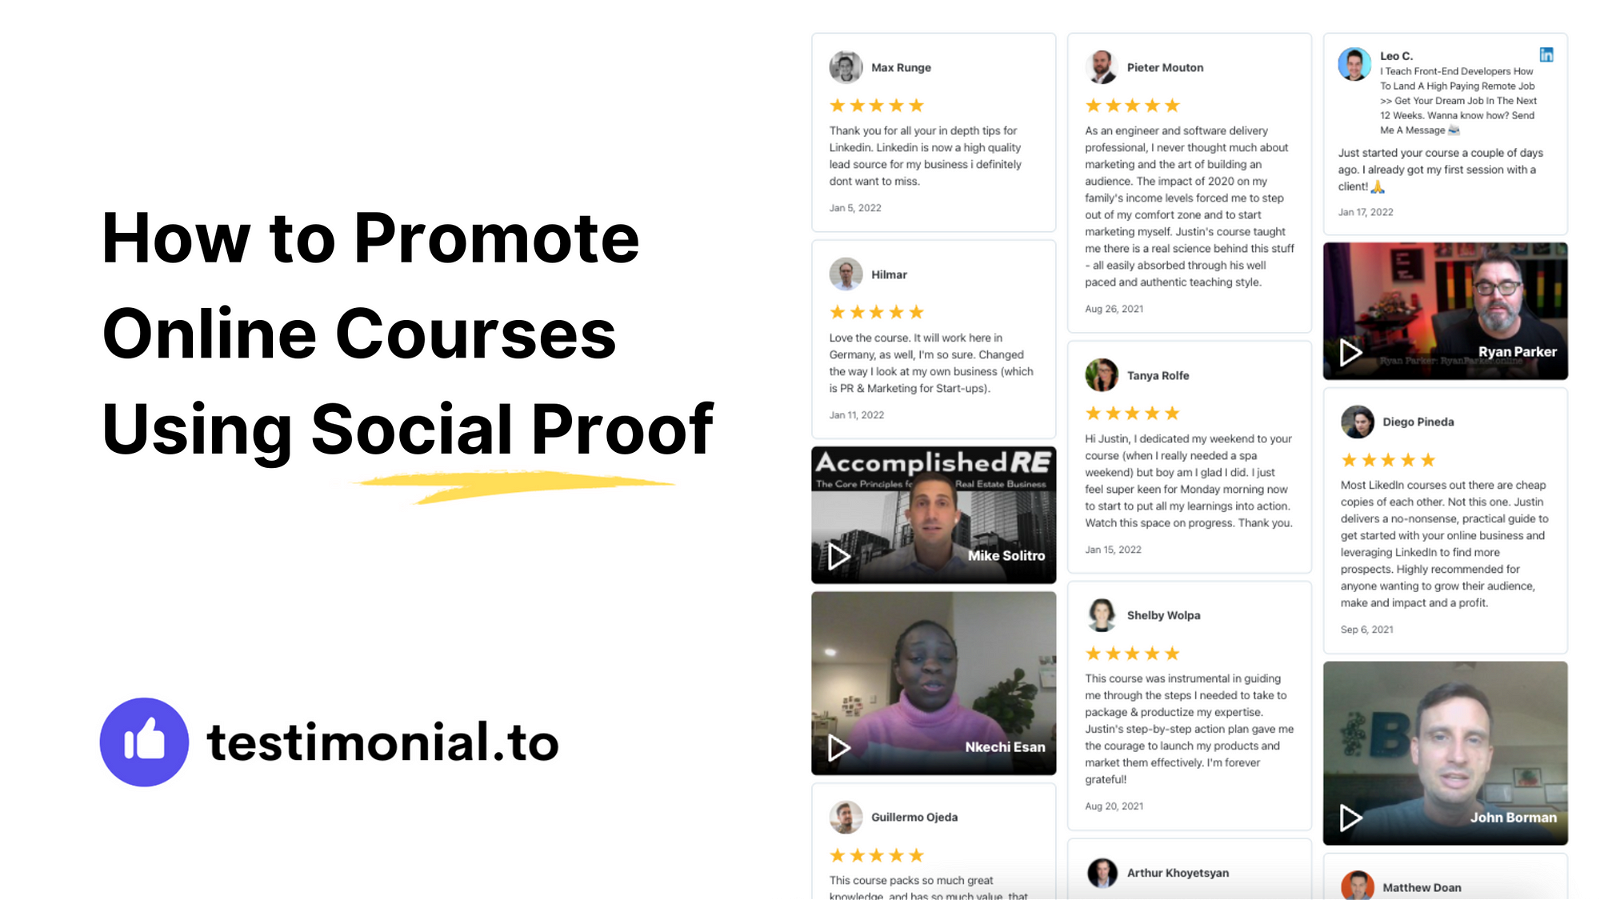 Why and How to Promote Online Courses Using Social Proof